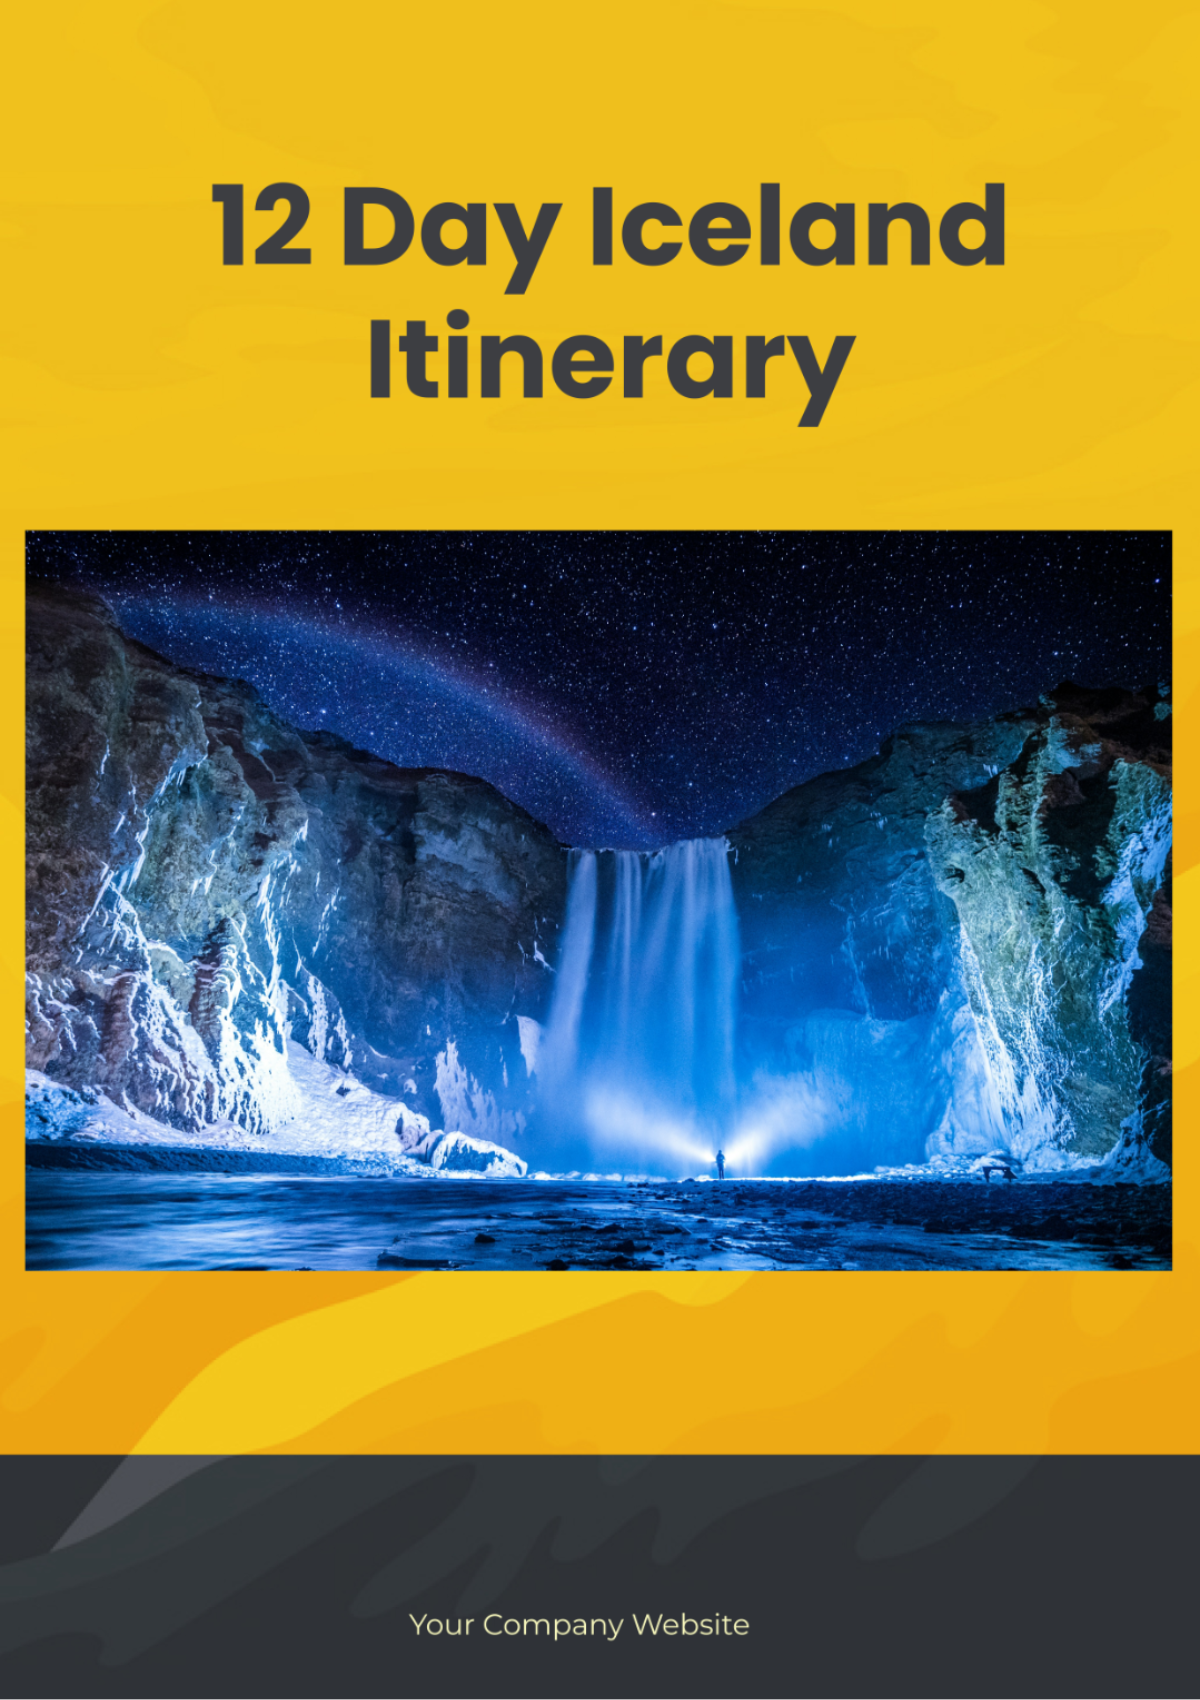 12 Day Iceland Itinerary Template